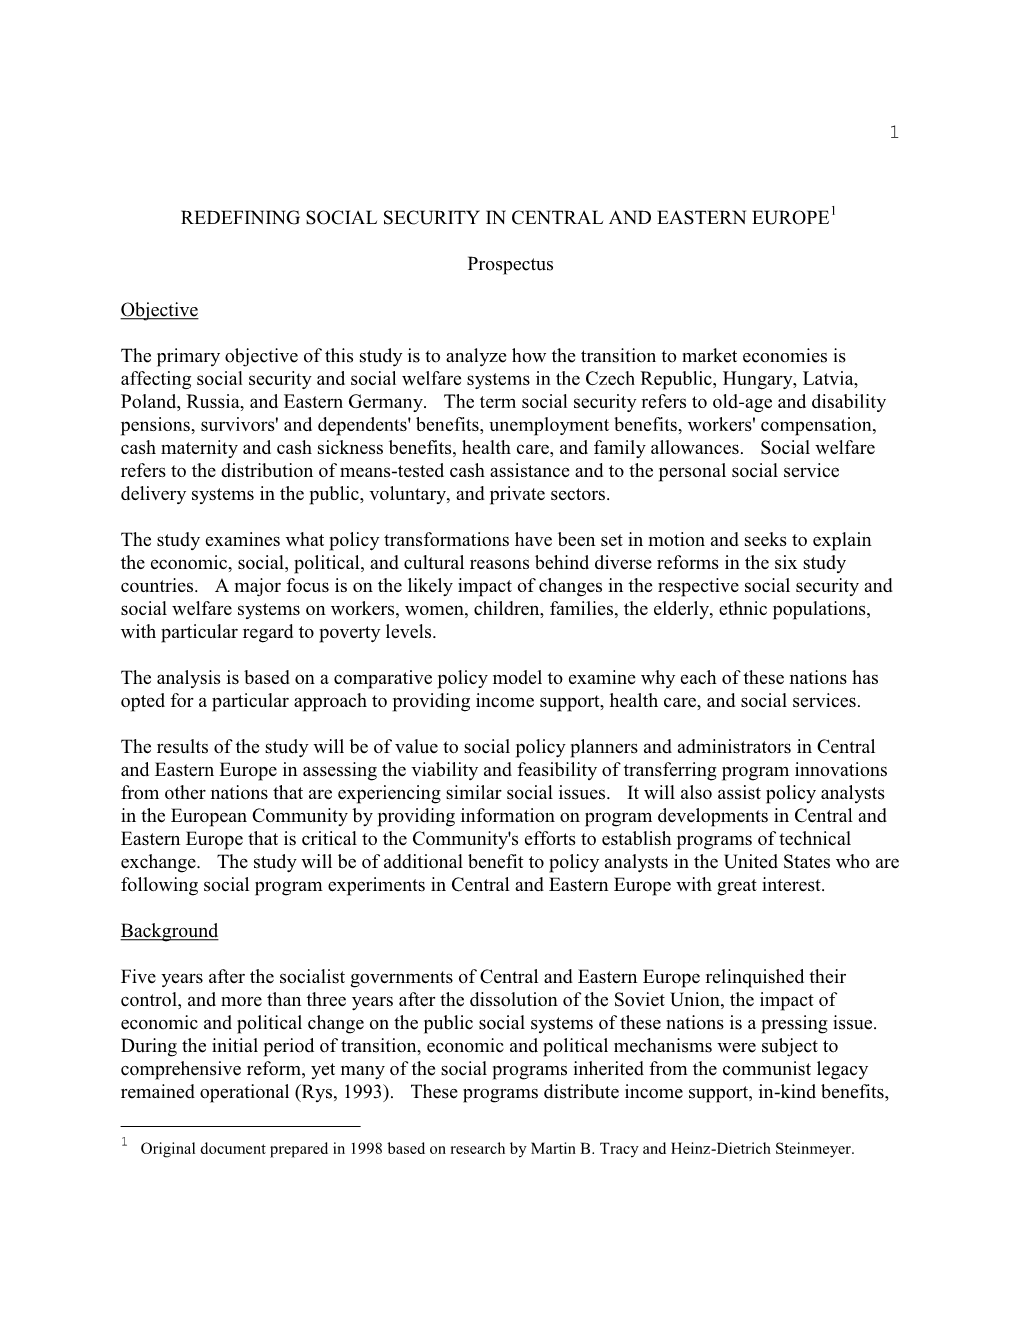 1 REDEFINING SOCIAL SECURITY in CENTRAL and EASTERN EUROPE Prospectus Objective the Primary Objective of This Study Is to Analyz